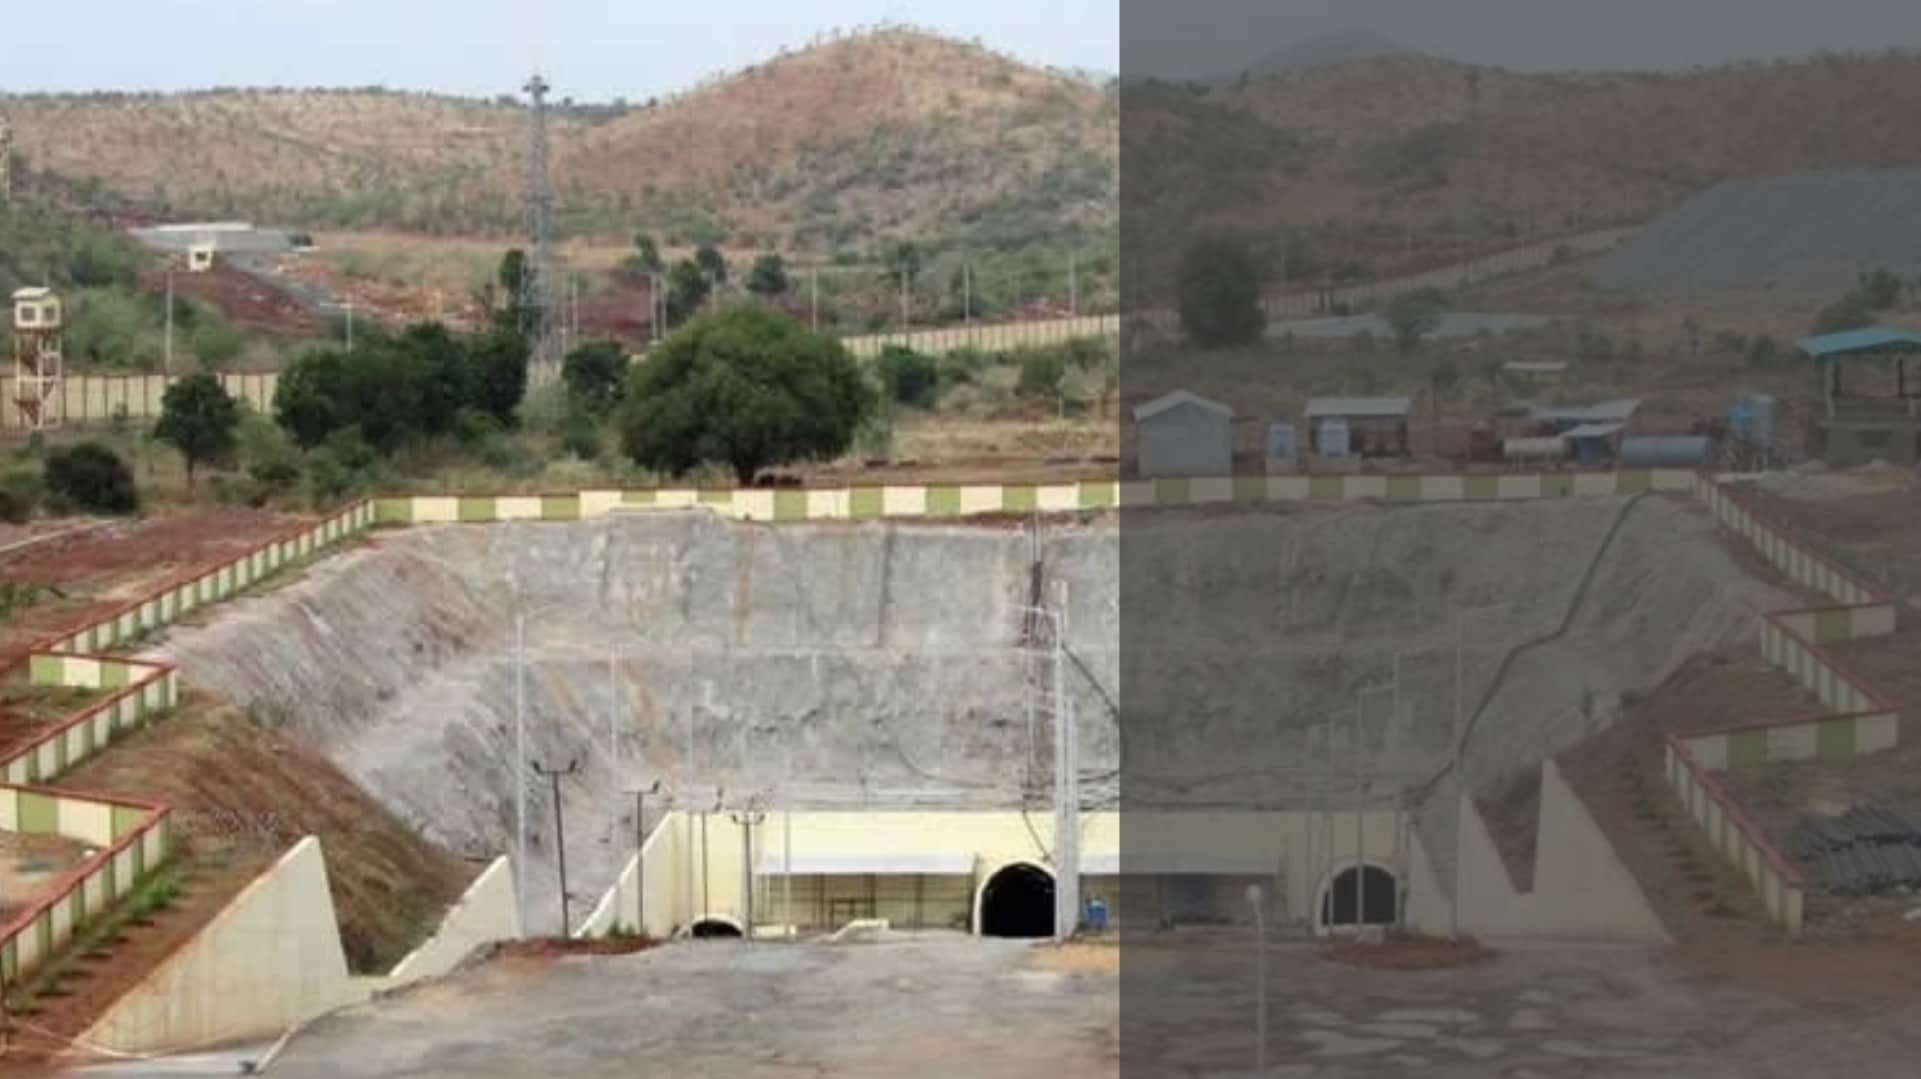 The real cost of uranium mining: The case of Tummalapalle